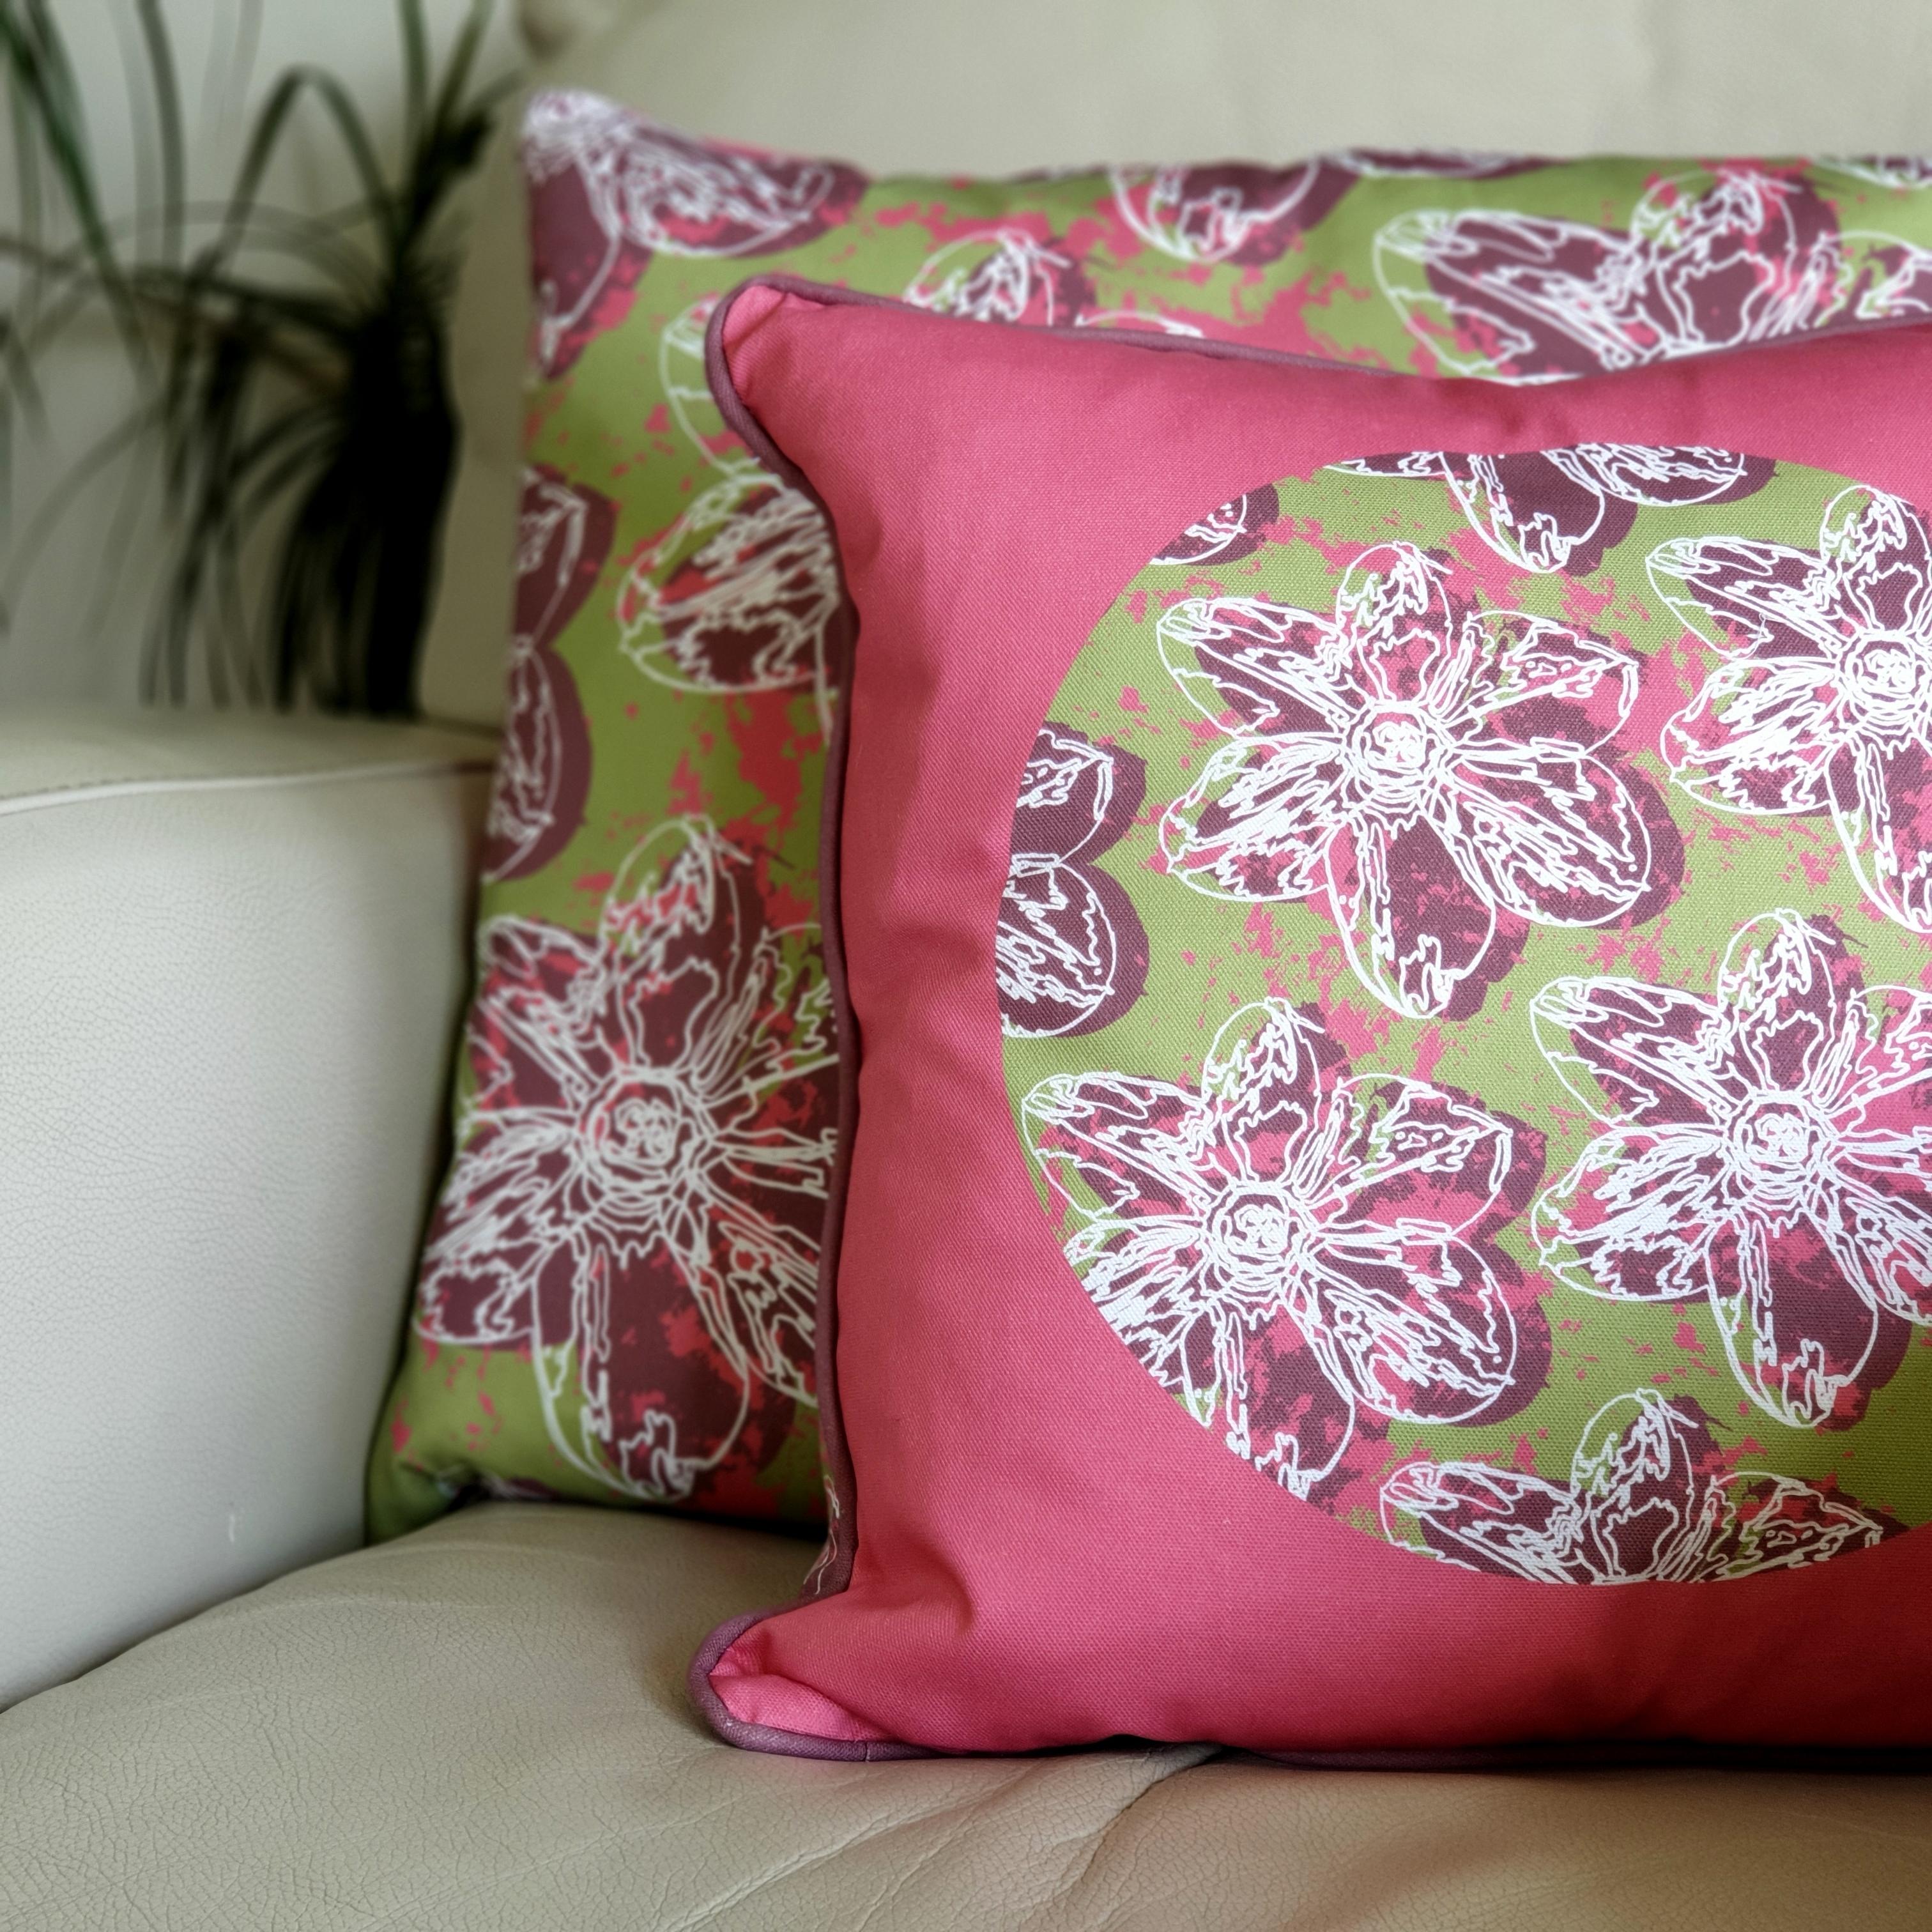 Double-sided 45cm square & 51cm square Flower Splash cushions, showing both sides, designed by thetinkan. Dark red narcissus flower with white traced outline set within an olive green background with salmon pink paint splashes. Available with an optional luxury cushion inner pad. VIEW PRODUCT >>